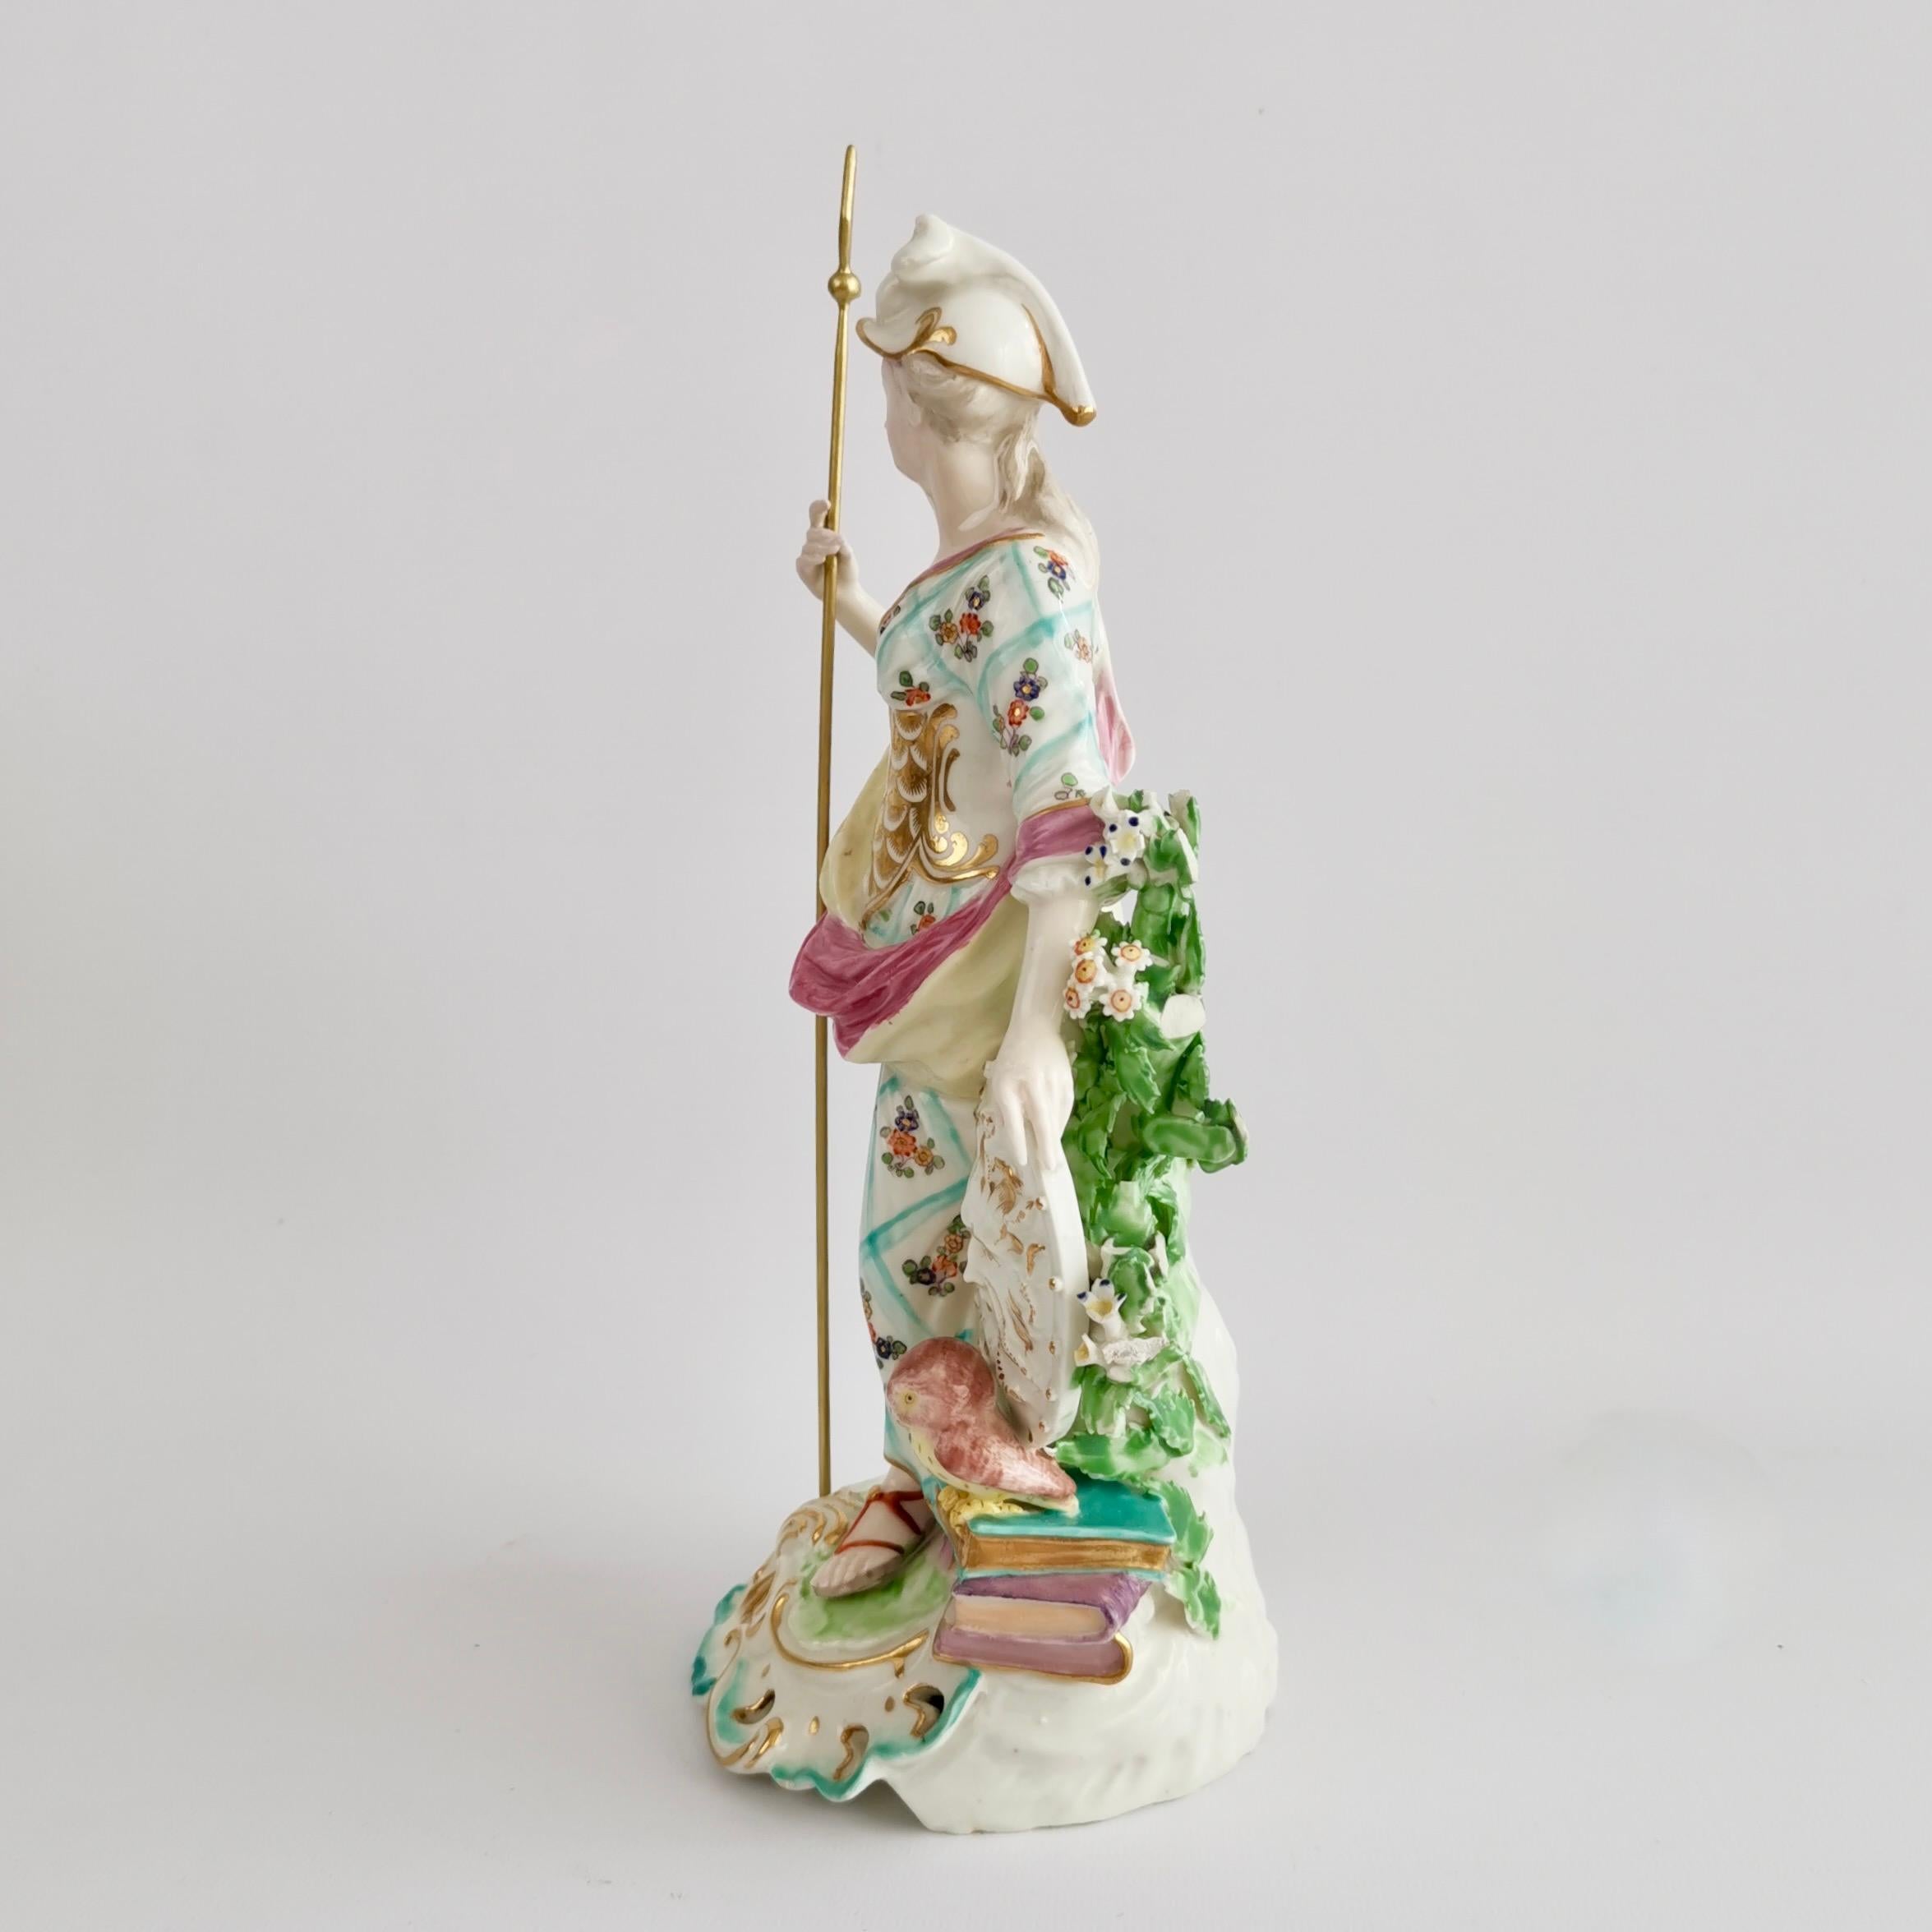 This is a beautiful Derby porcelain figure of the goddess Minerva made around 1765, which was the Rococo era. The figure is finely made and in fabulous condition.
 
The Derby Porcelain factory has its roots in the late 1740s, when Andrew Planché,